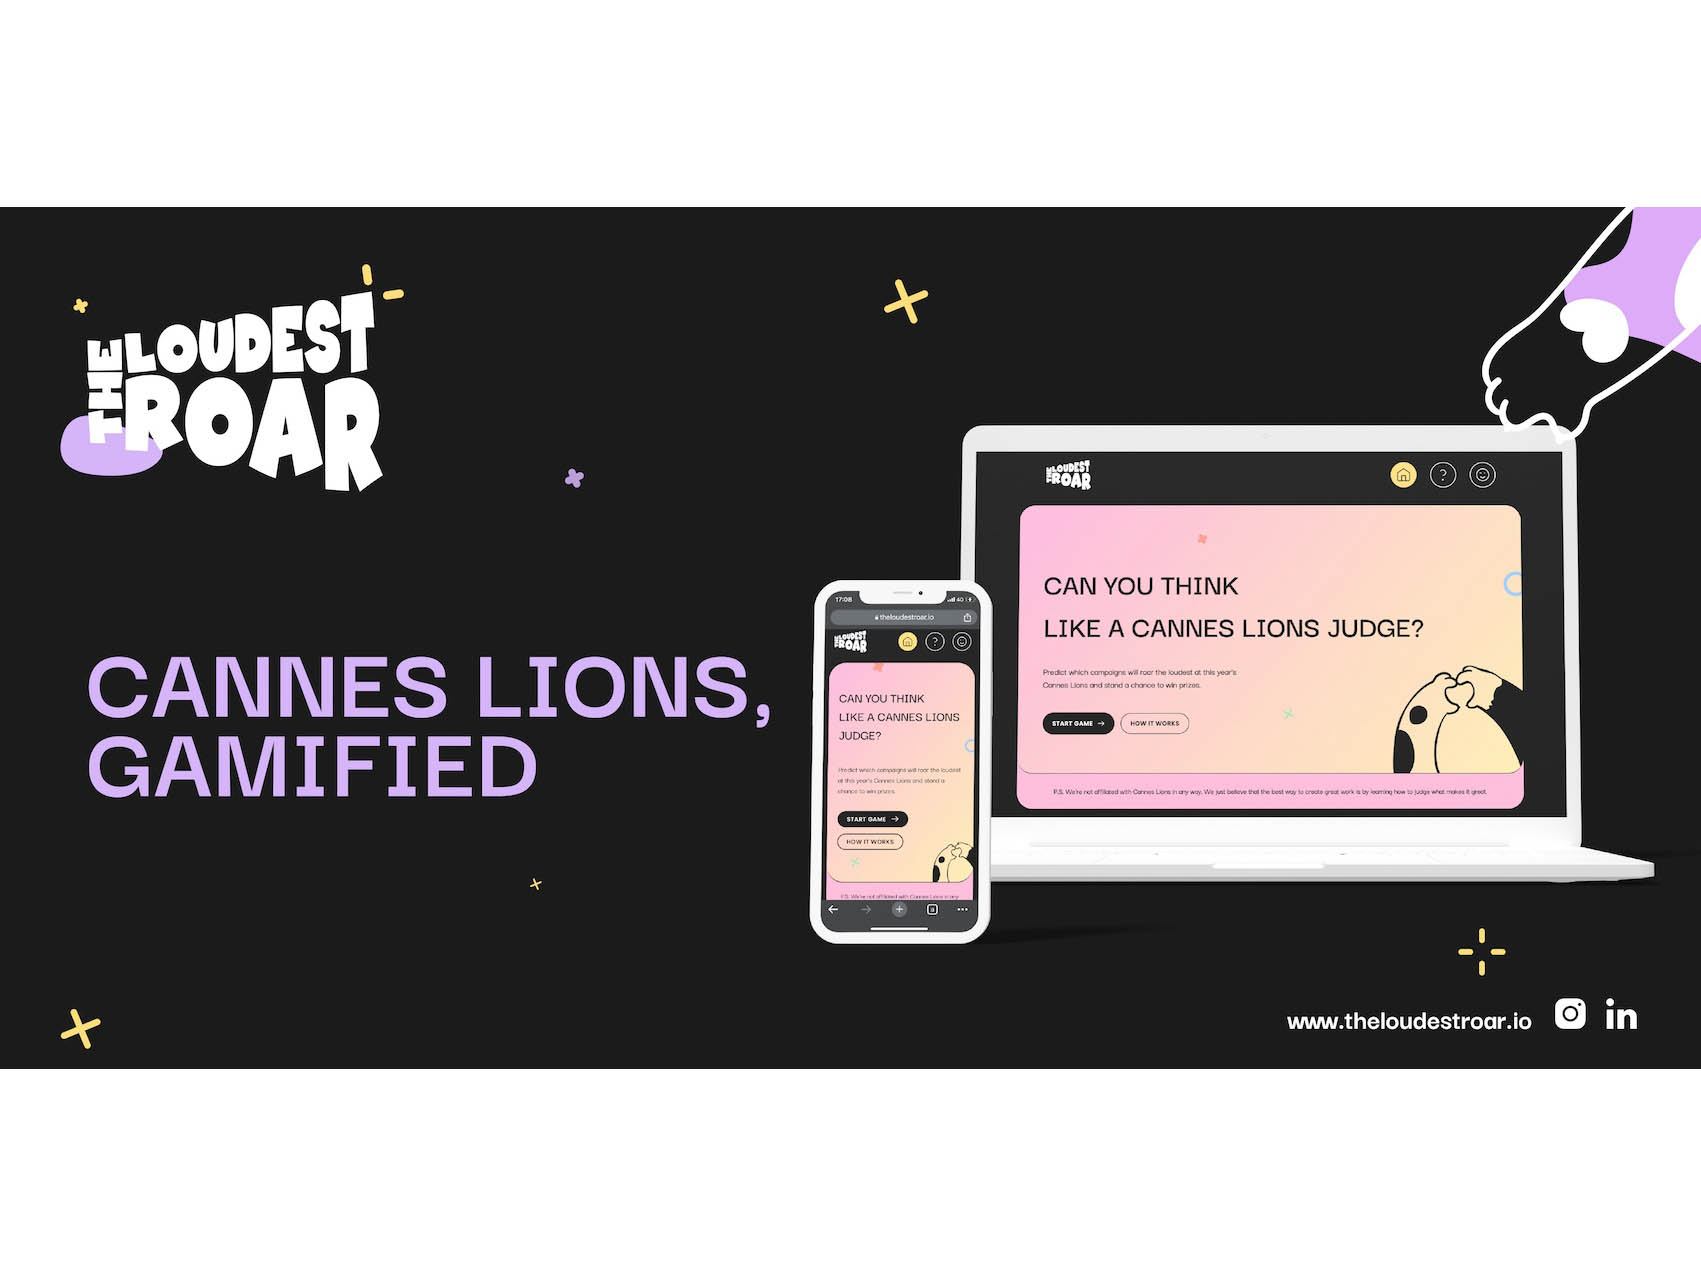 Emerging talents can now virtually immerse themselves in the world of Cannes Lions through The Loudest Roar